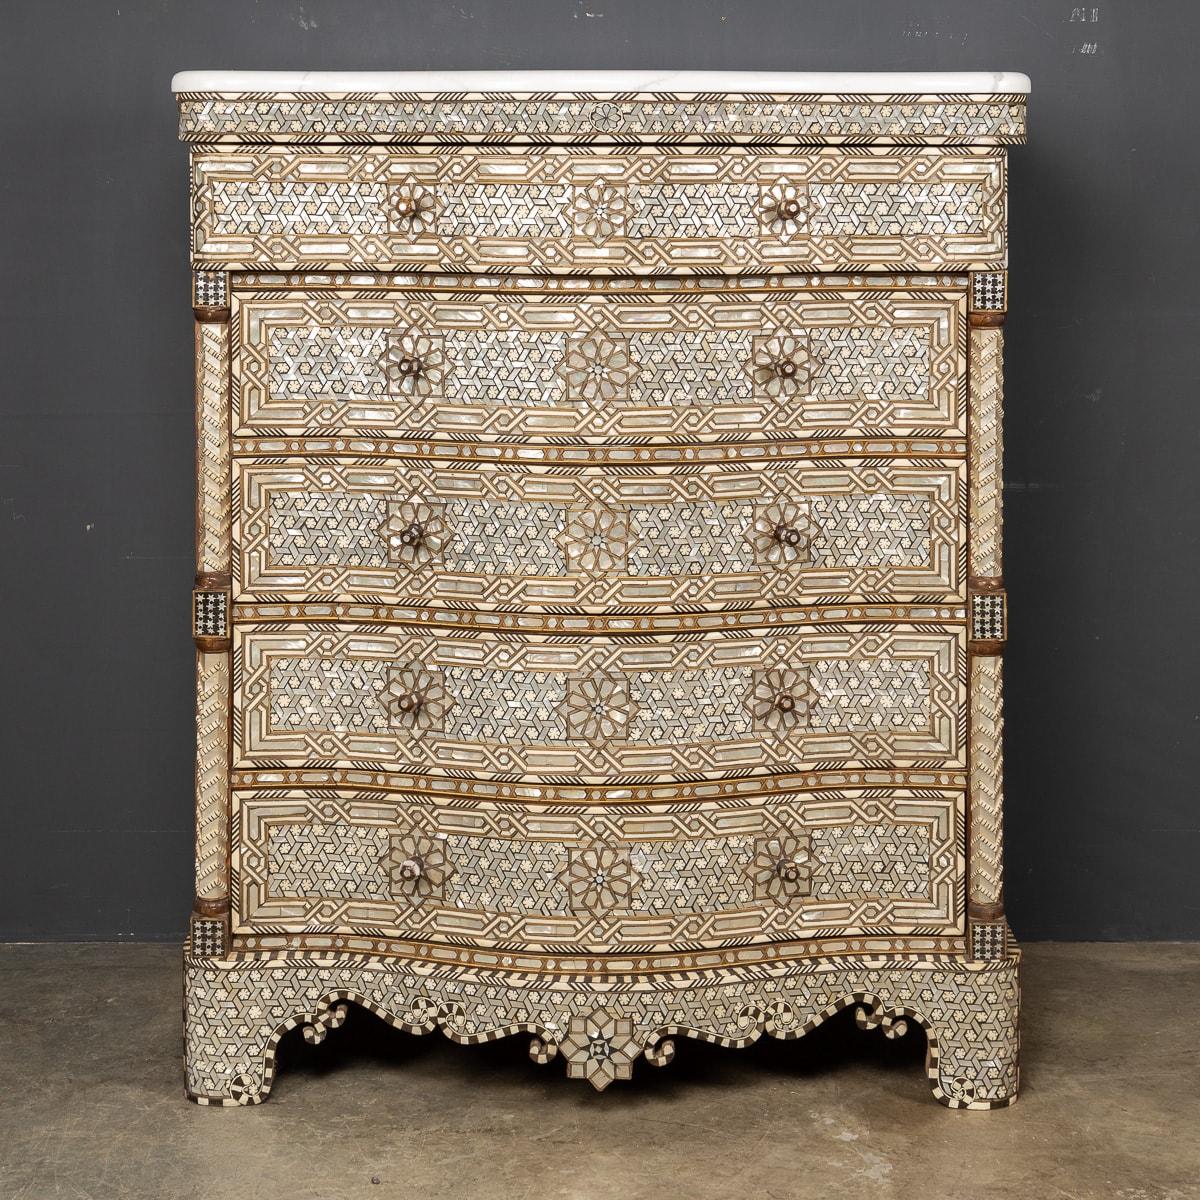 A truly stunning mid-20th Century Middle Eastern chest inlaid with intricately carved patterns of mother of pearl and bone. This piece has carved handles and set with a marble top, five drawers in total.

CONDITION
In Great Condition - No